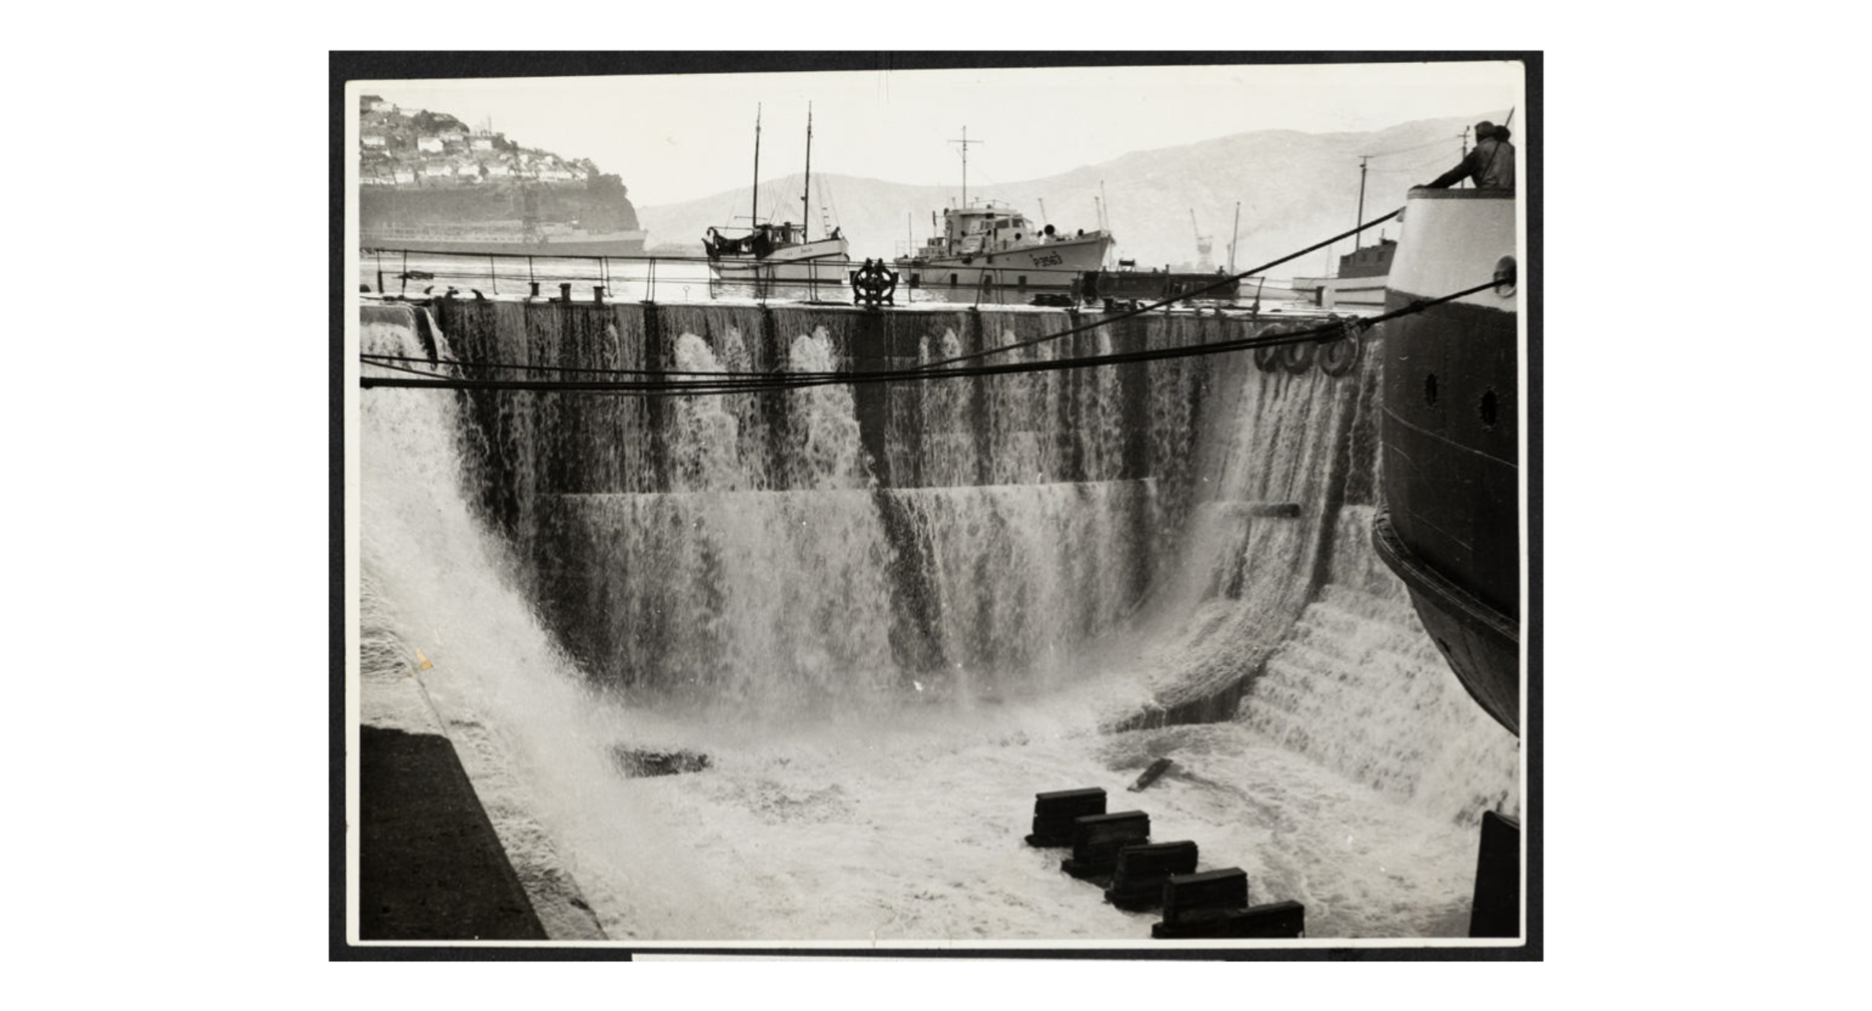 Water pouring into the Graving Dock at Lyttelton Port during the 23 May 1960 Tsunami